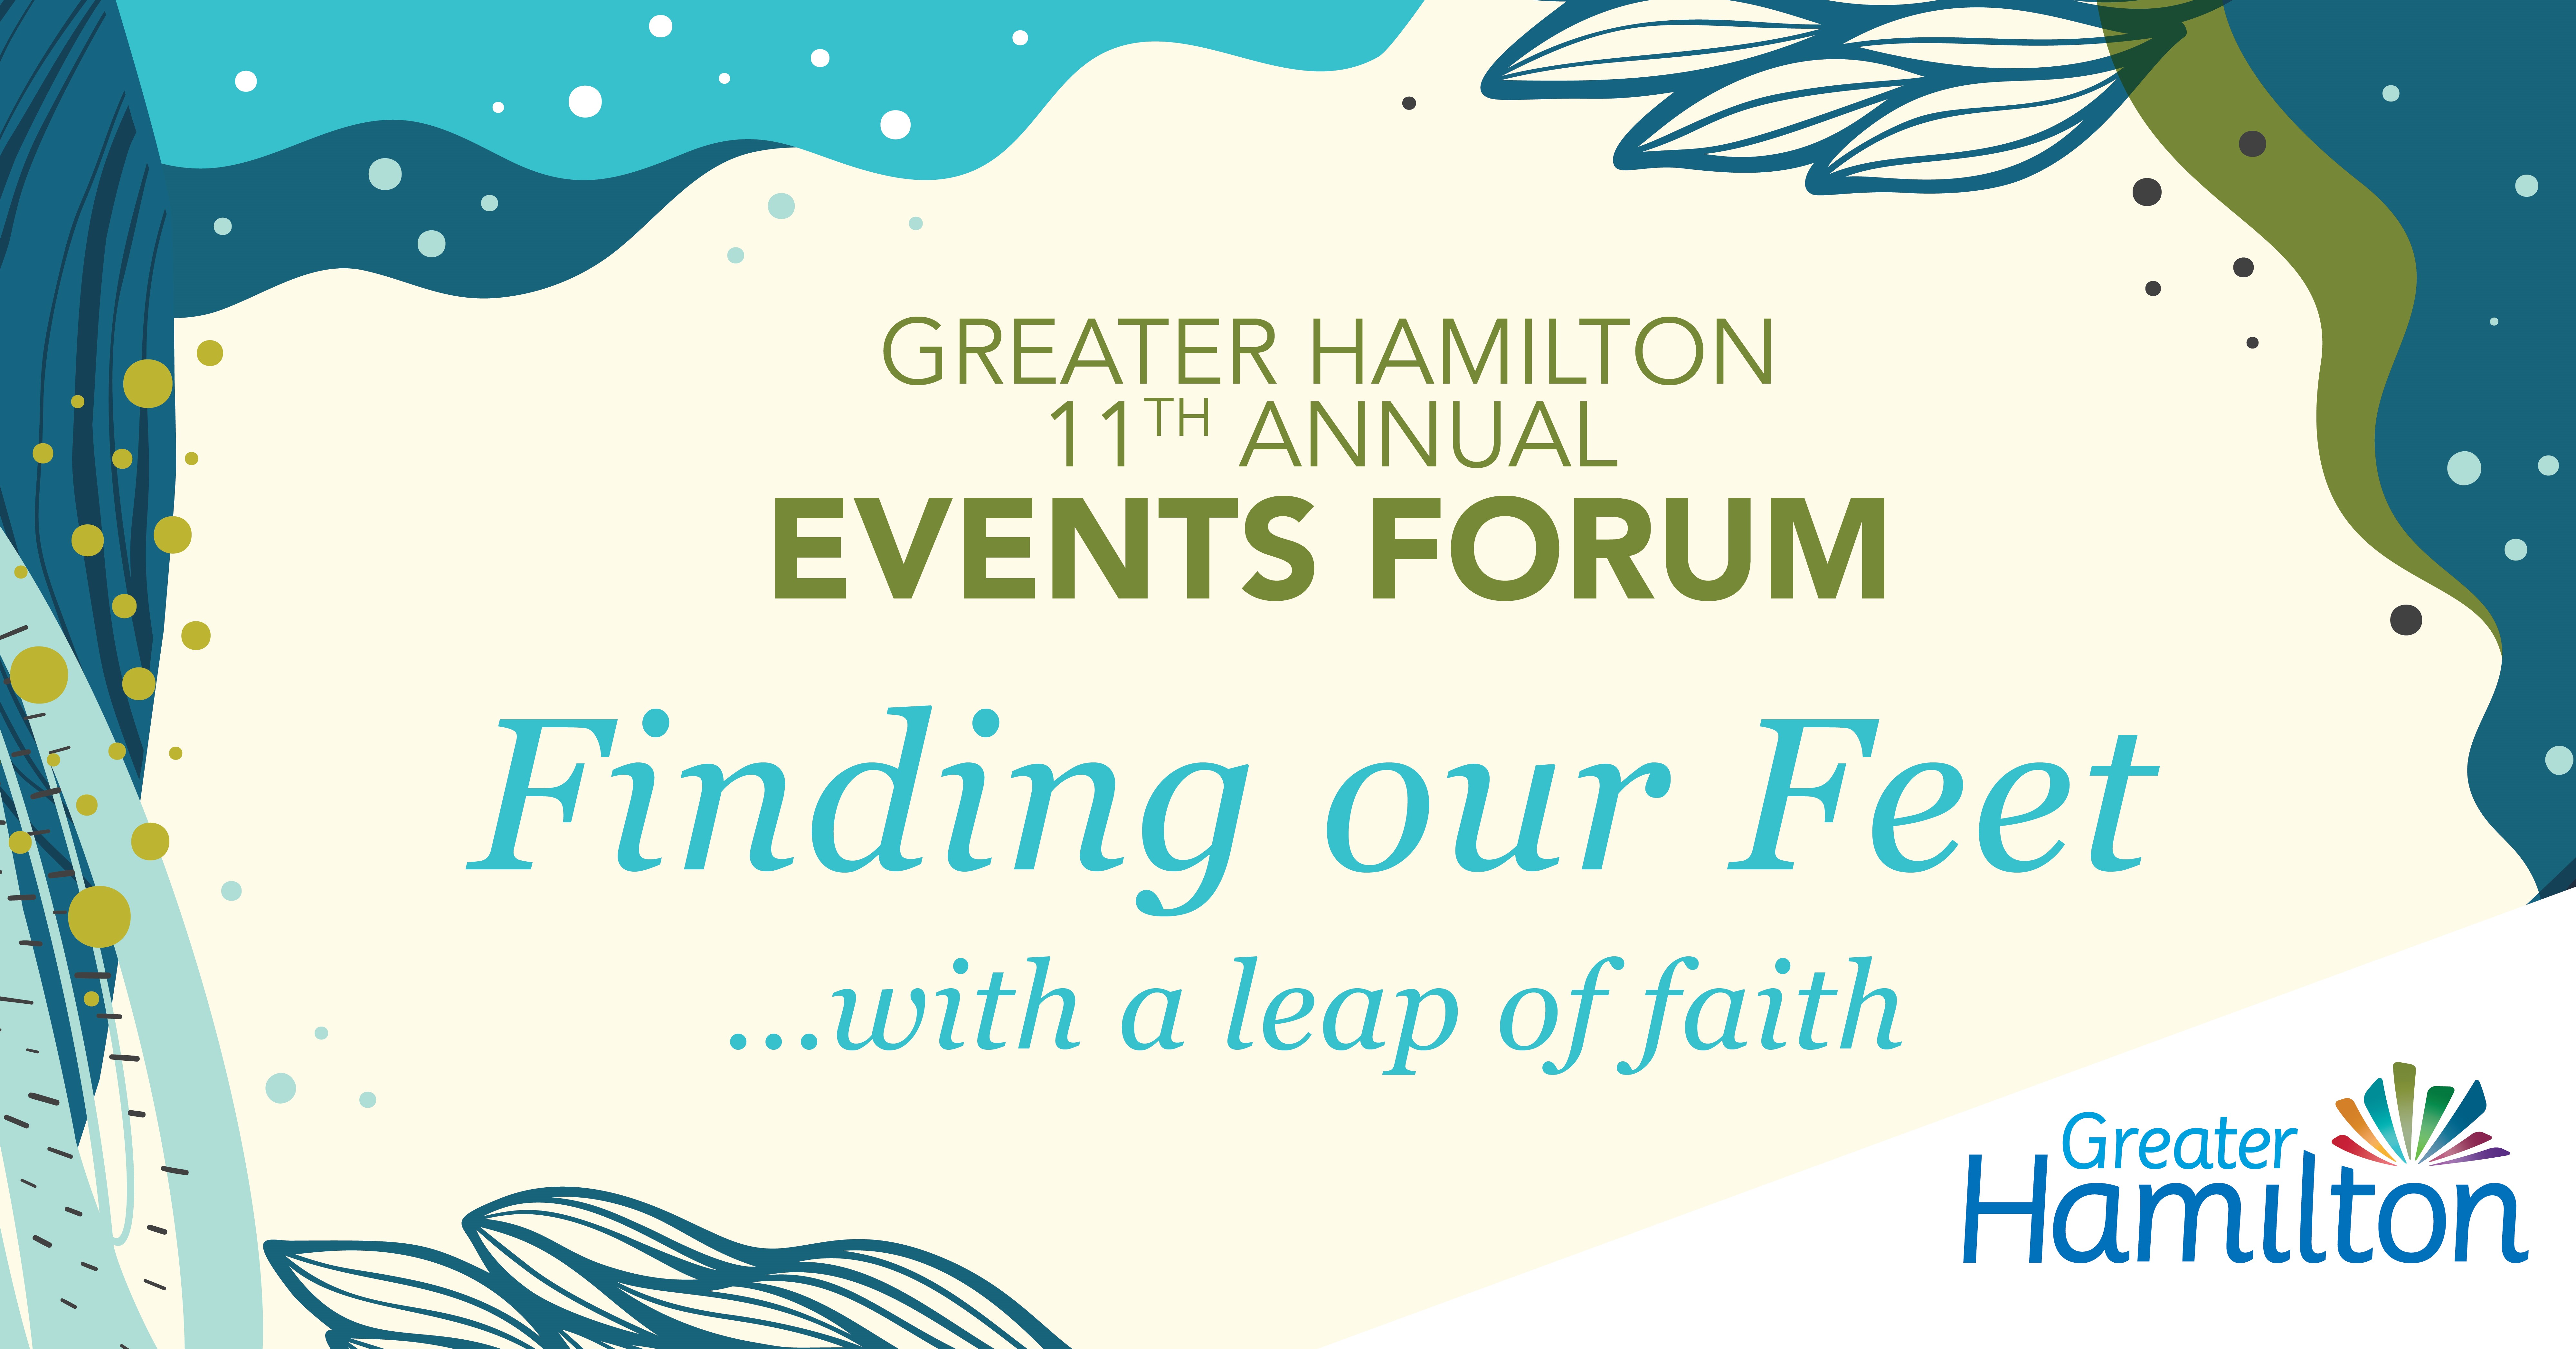 Image: EventsForum 
Link to child page: Greater Hamilton Events Forum